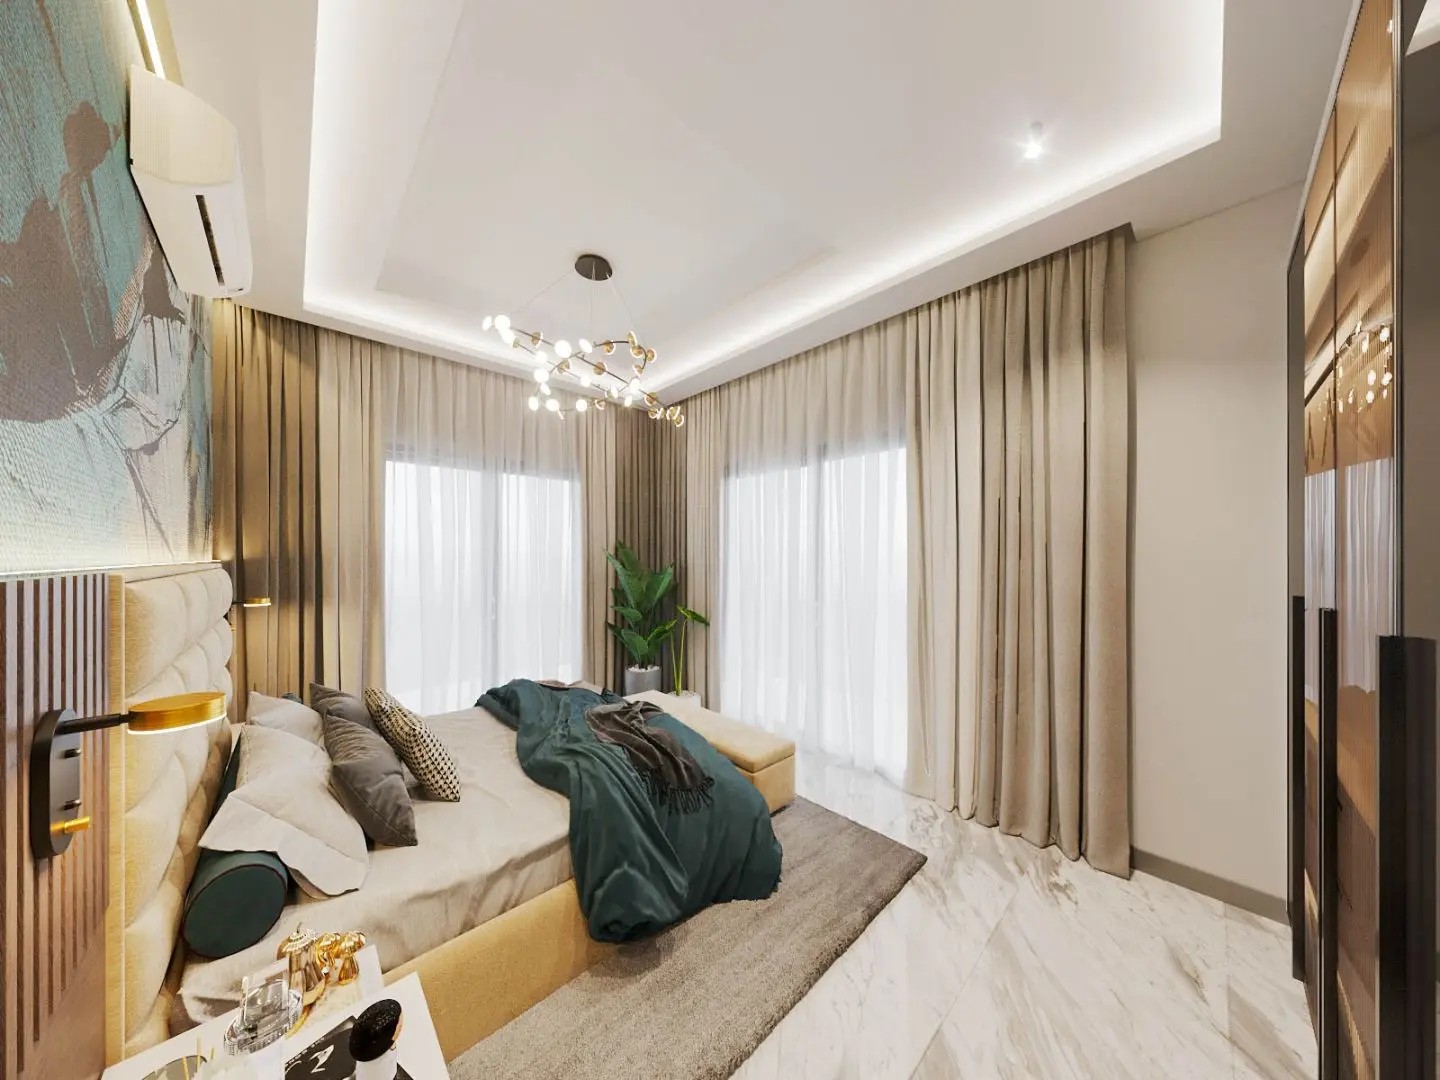 NEW PERFECT HOUSING PROJECT IN DEMİRTAŞ